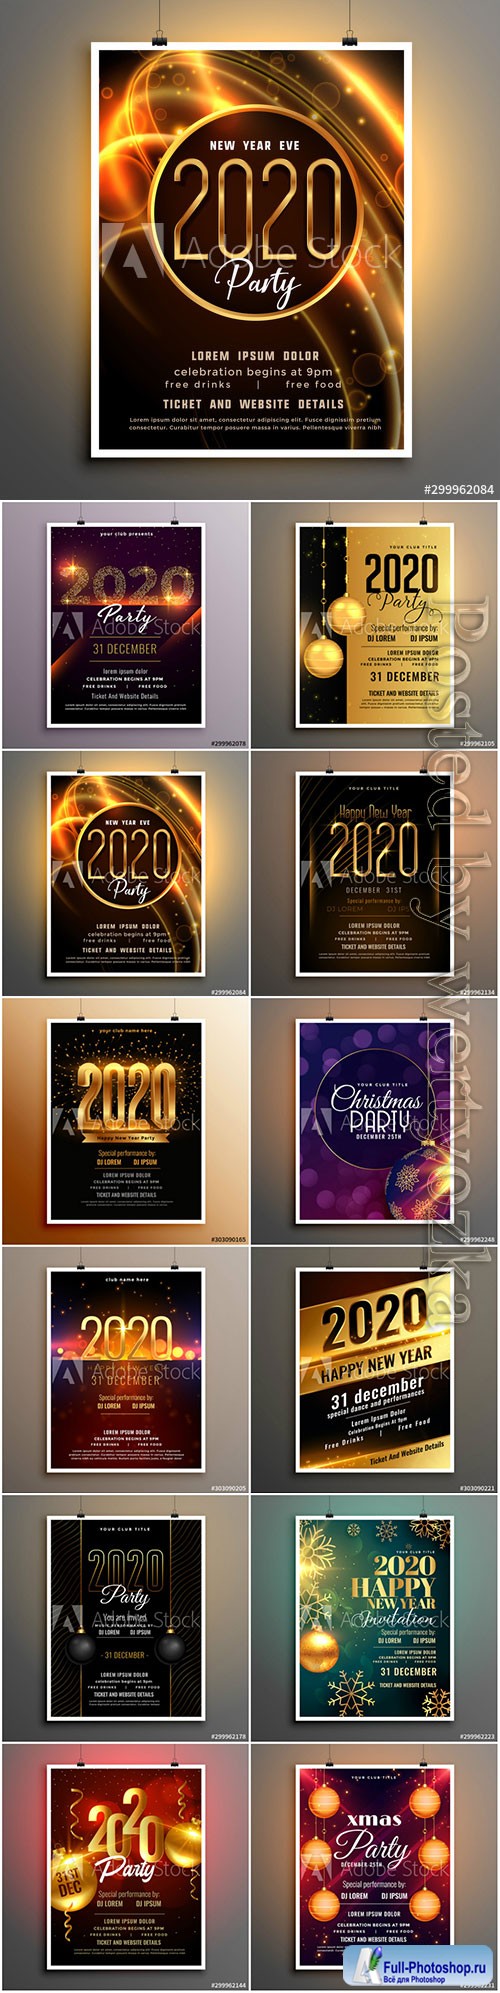 2020 new year shiny party event flyer design template